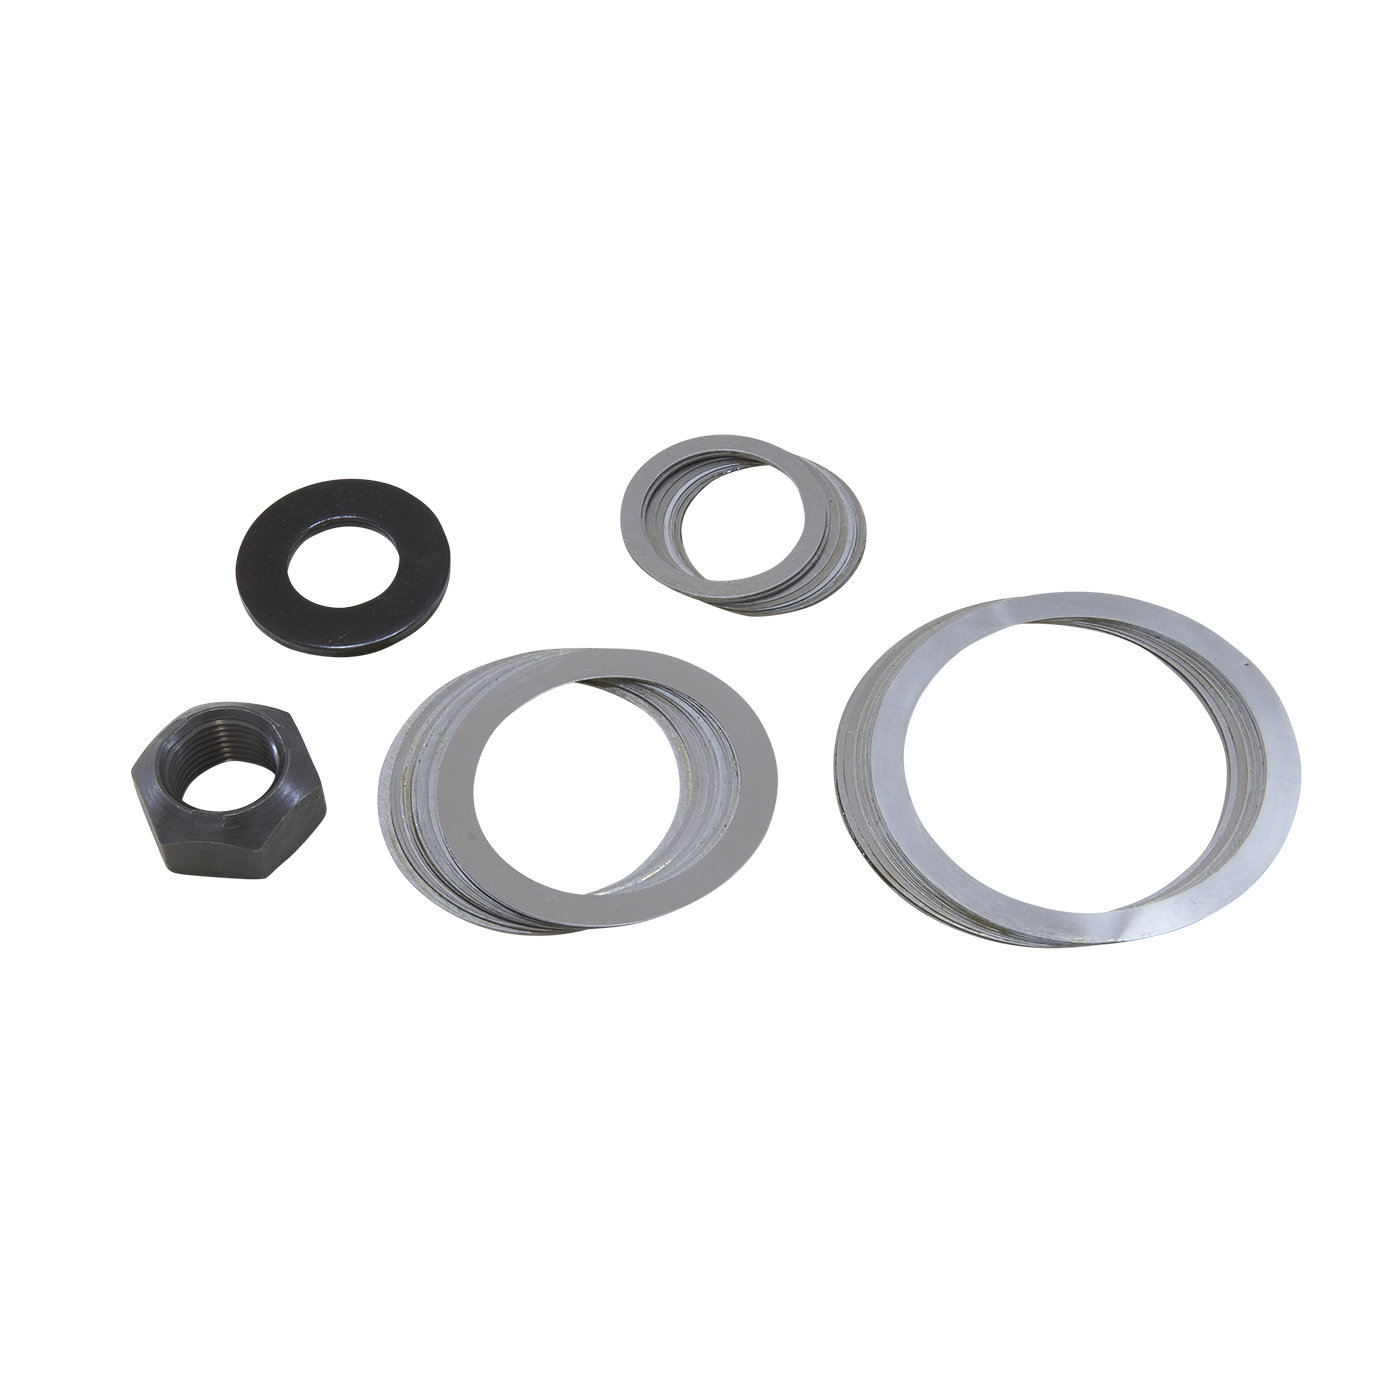 Yukon SK 706377 Replacement Complete Shim Kit for Dana 30 Front Differential